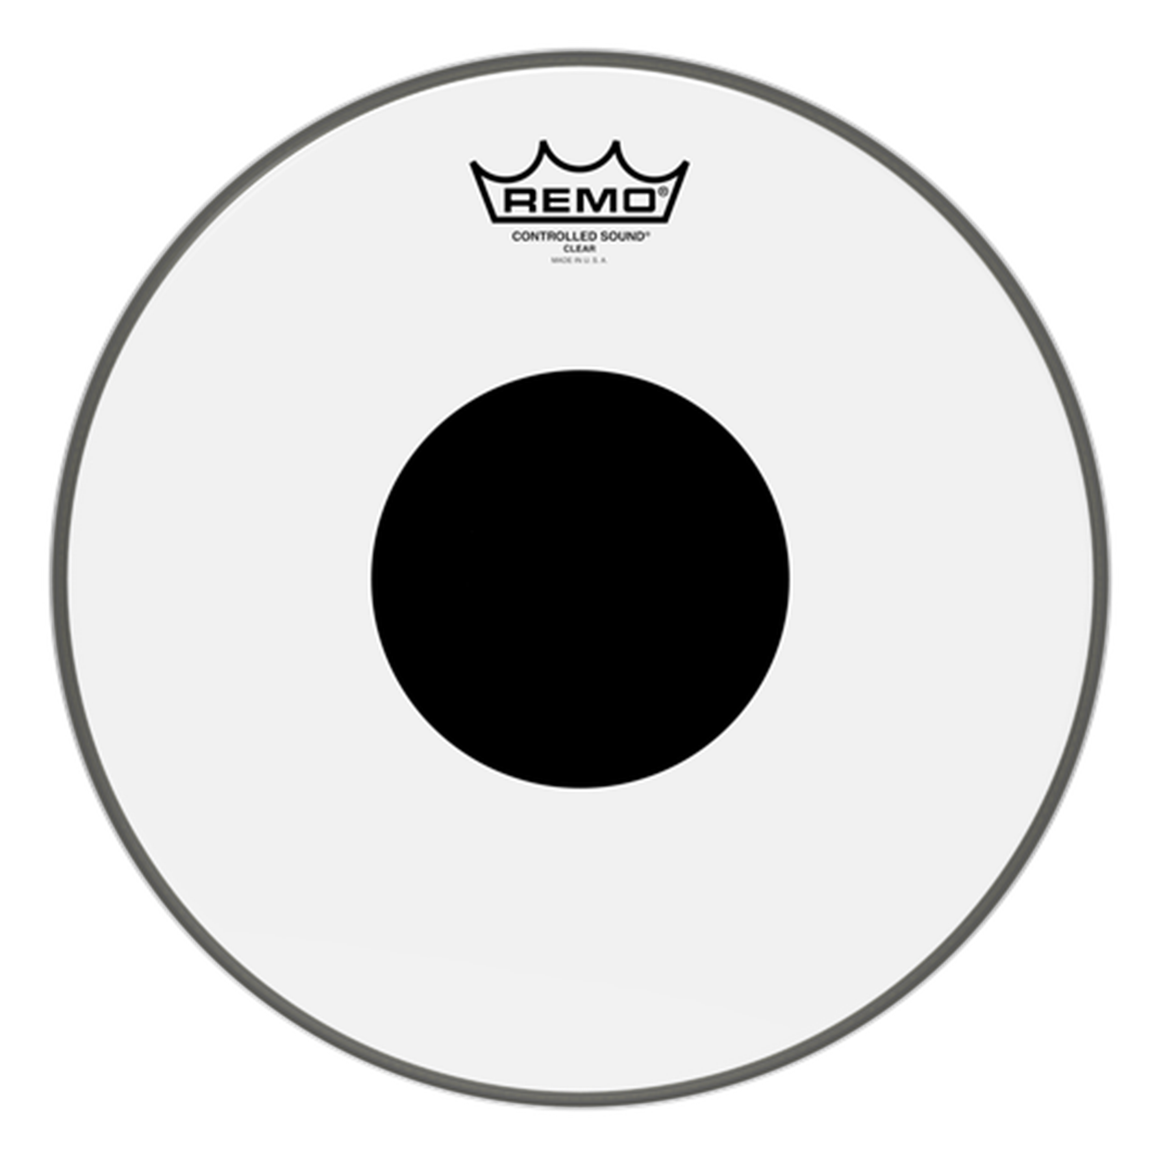 REMO CS031000 10" Controlled Sound Clear Drum Head (Black Dot)